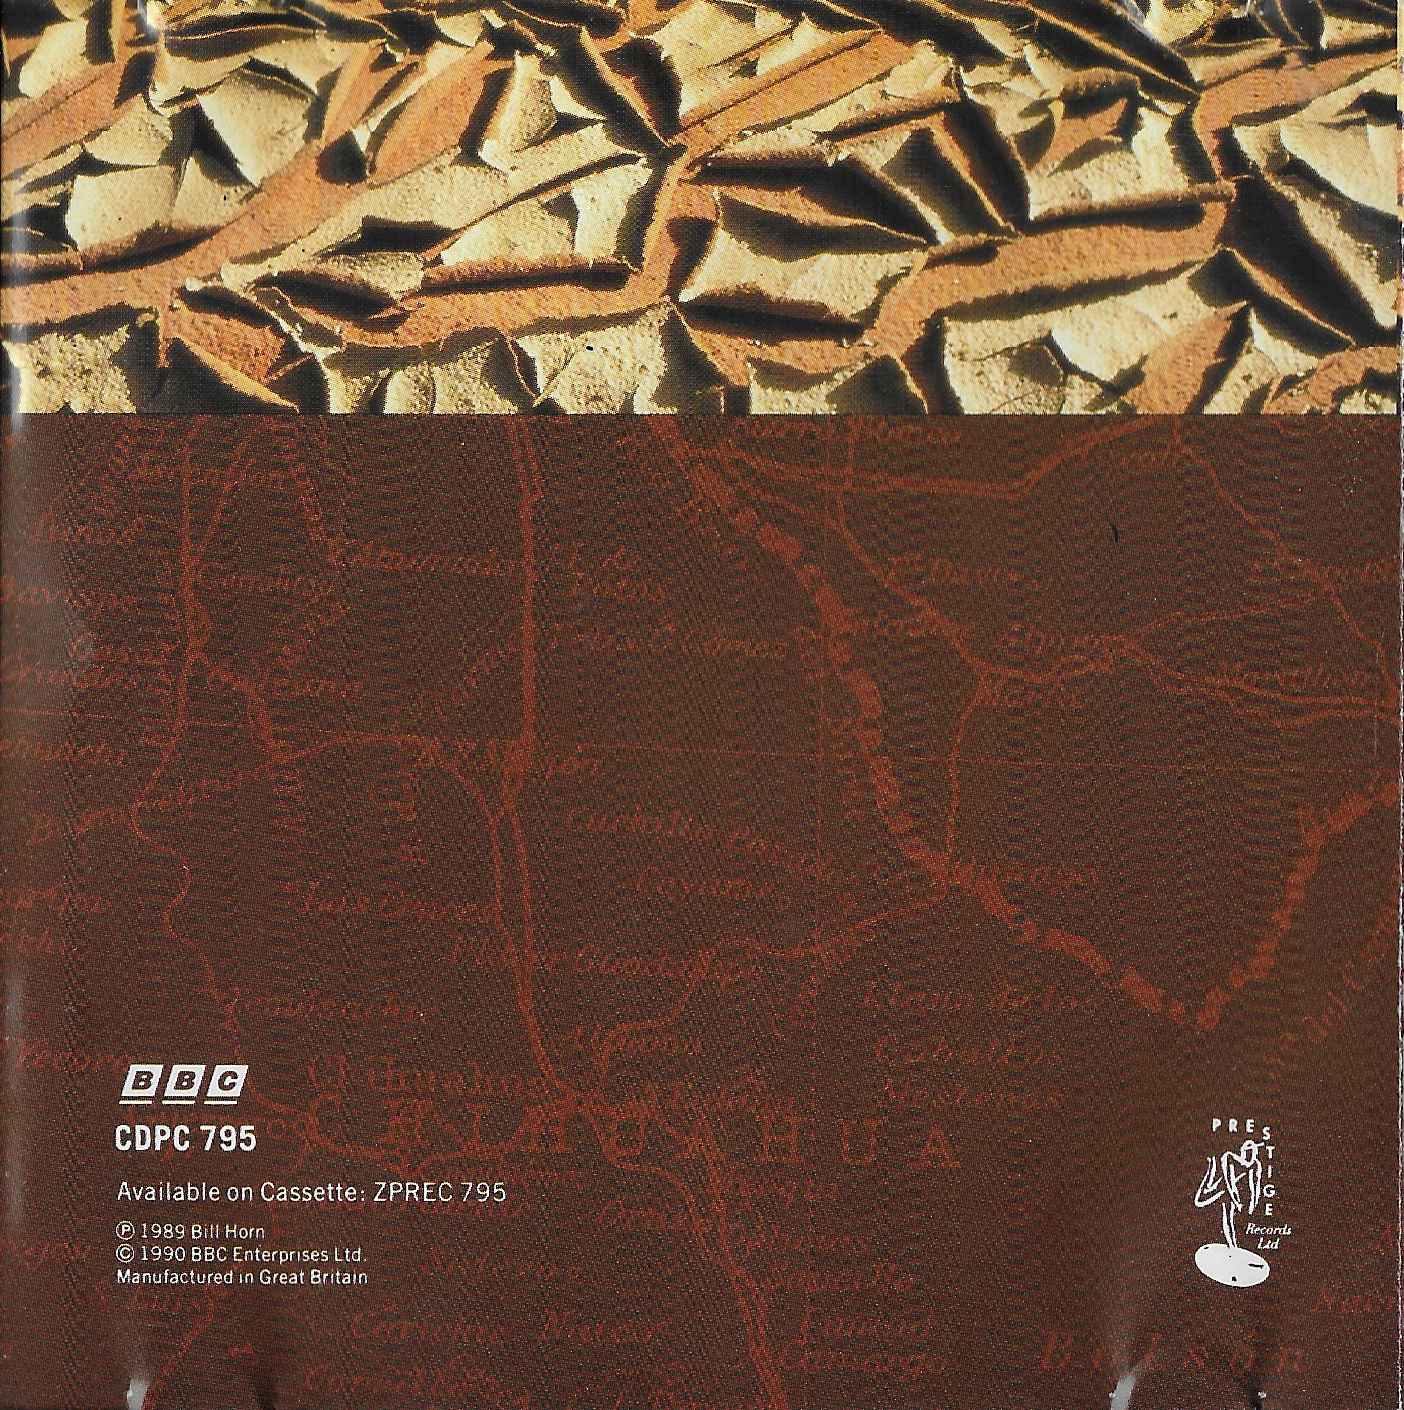 Middle of cover of CDPC 795